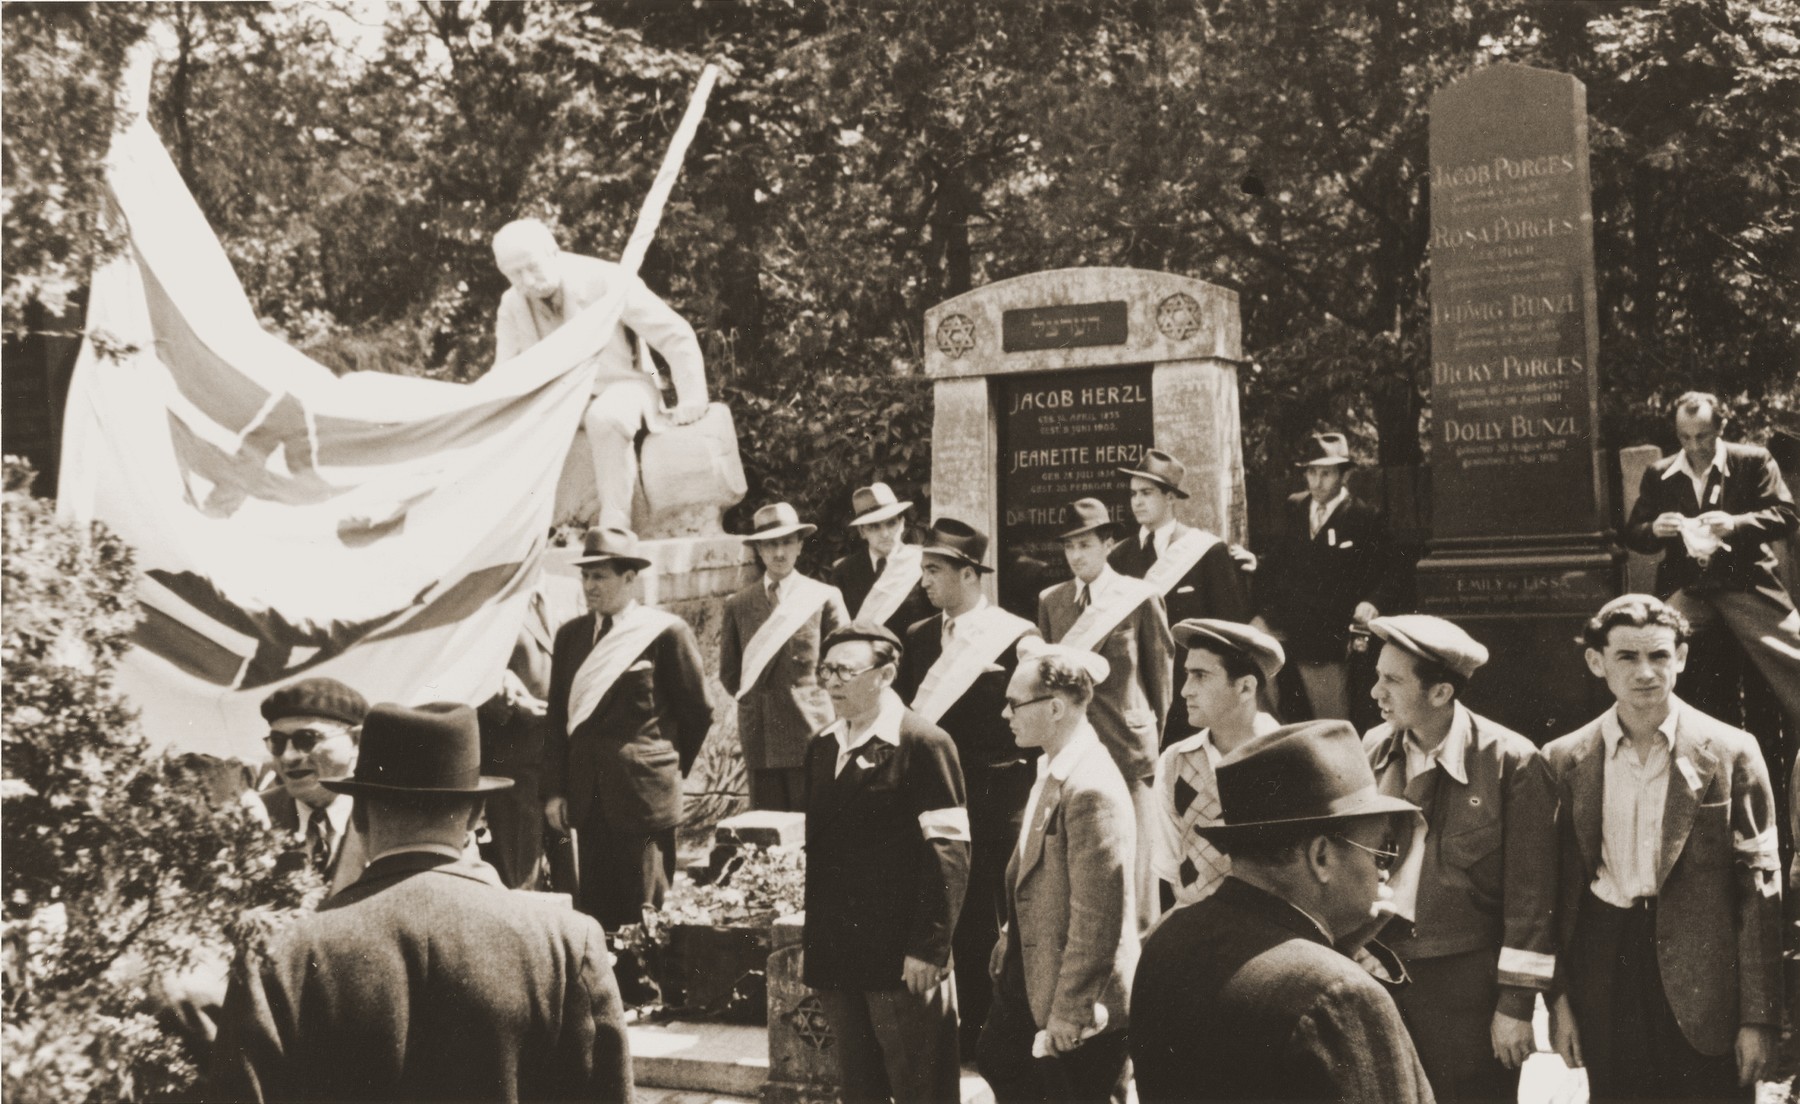 Members of the Betar Zionist youth movement demonstrate against British policy in Palestine at the tomb of Theodor Herzl in the Jewish cemetery in Vienna.  

The demonstration was timed to coincide with the visit of the United Nations Special Commission on Palestine to Vienna.